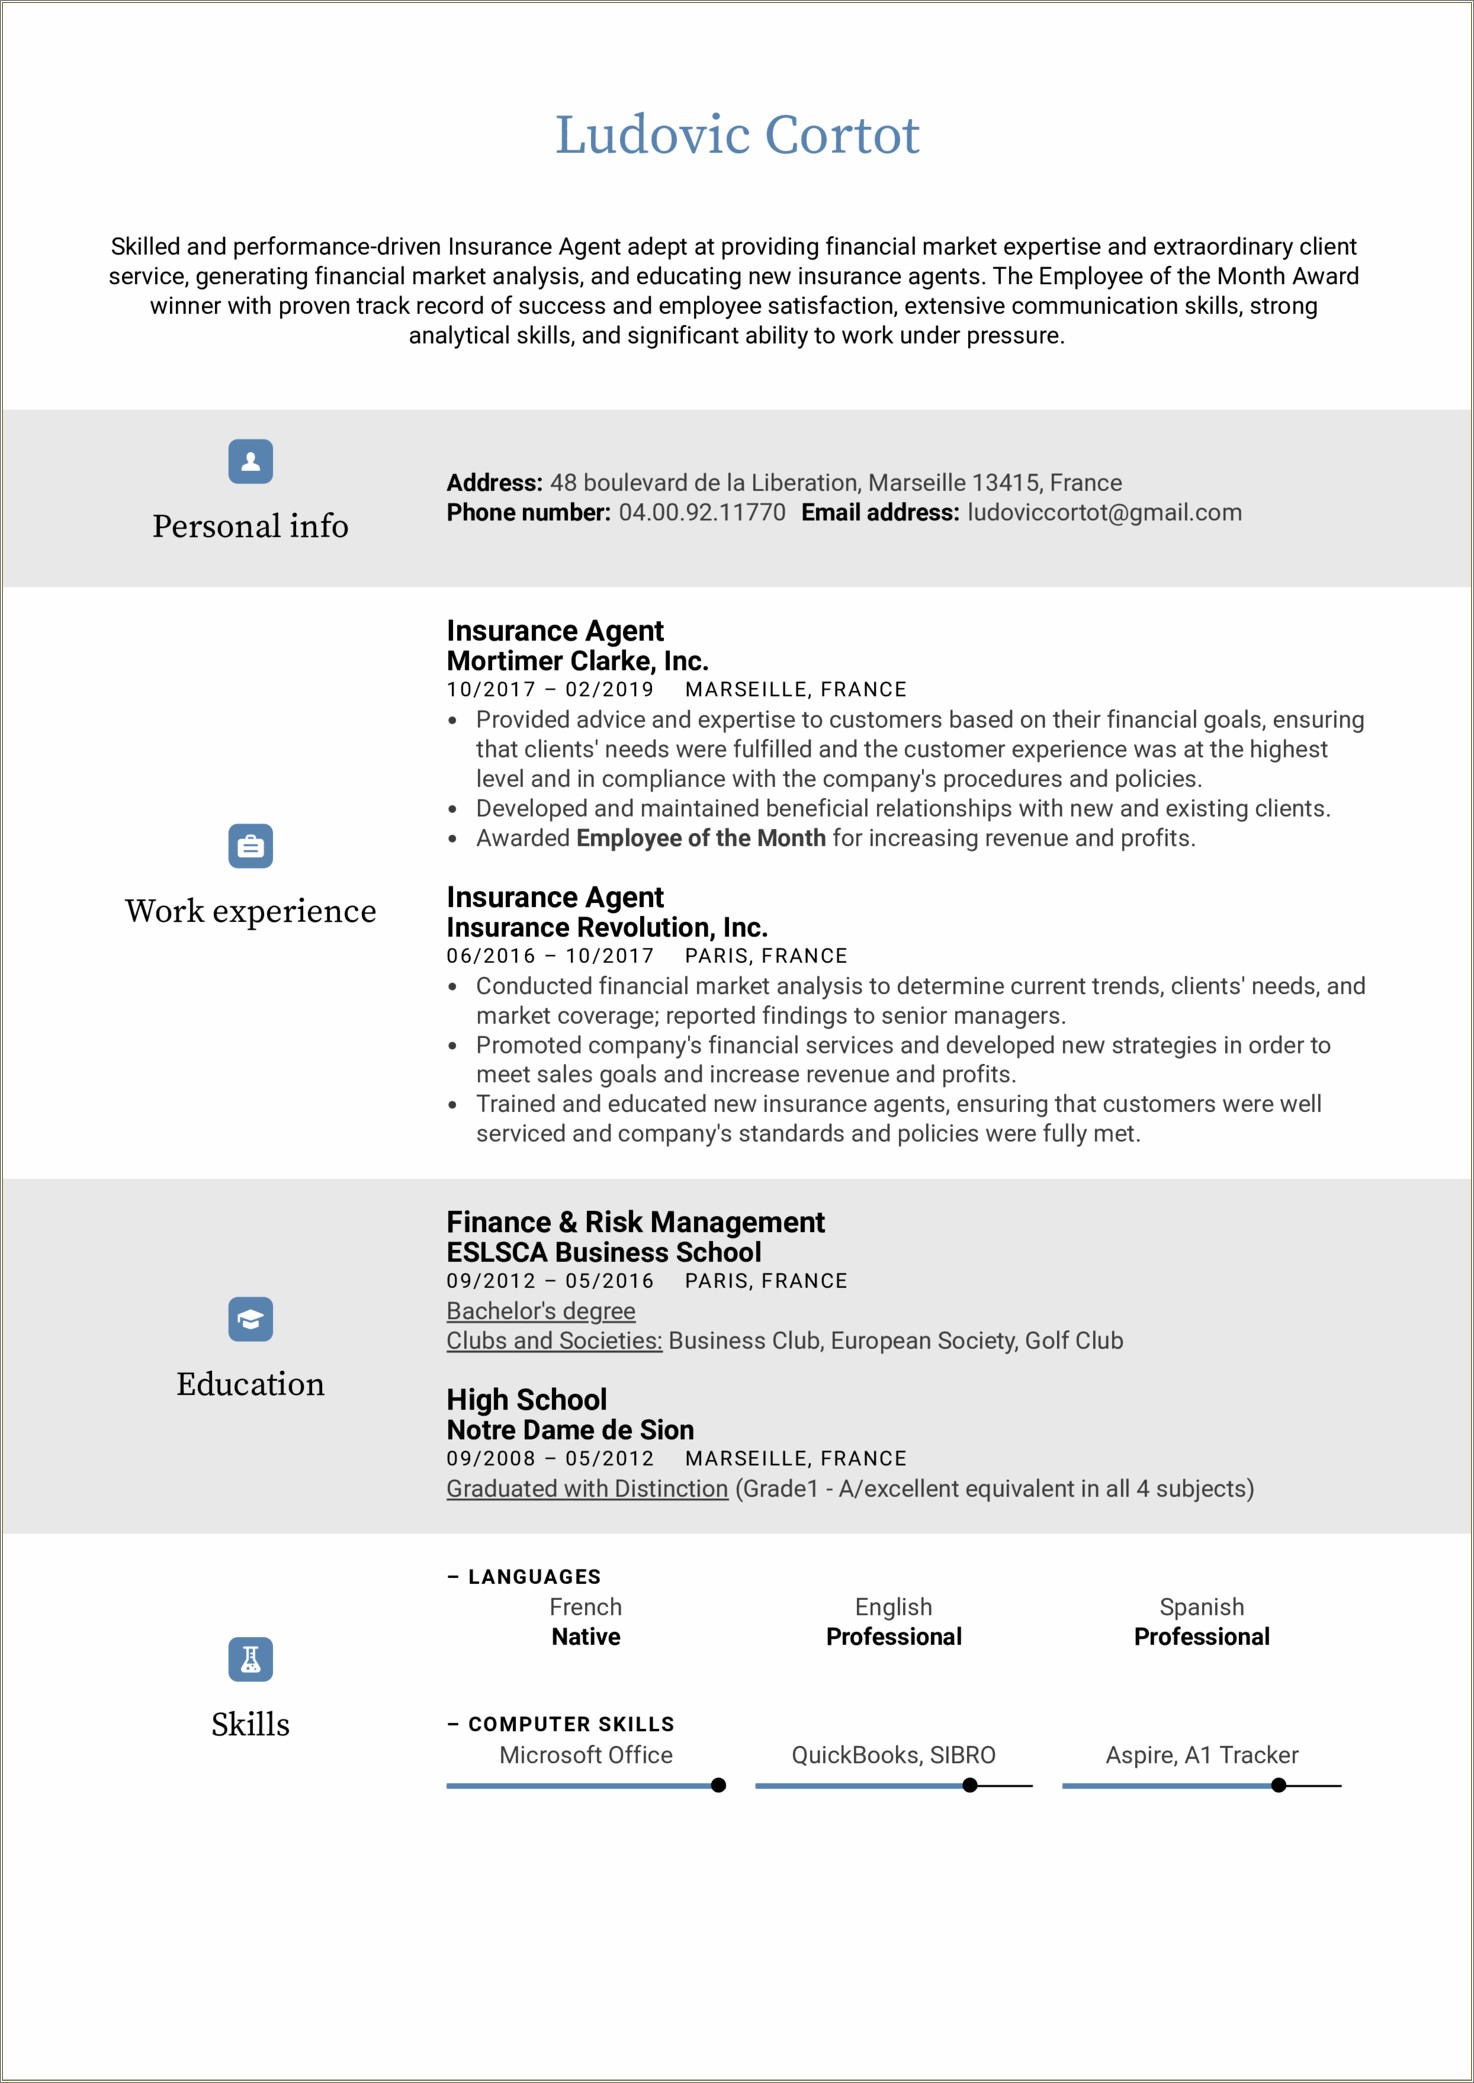 Sample Resume For Insurance Sales Manager